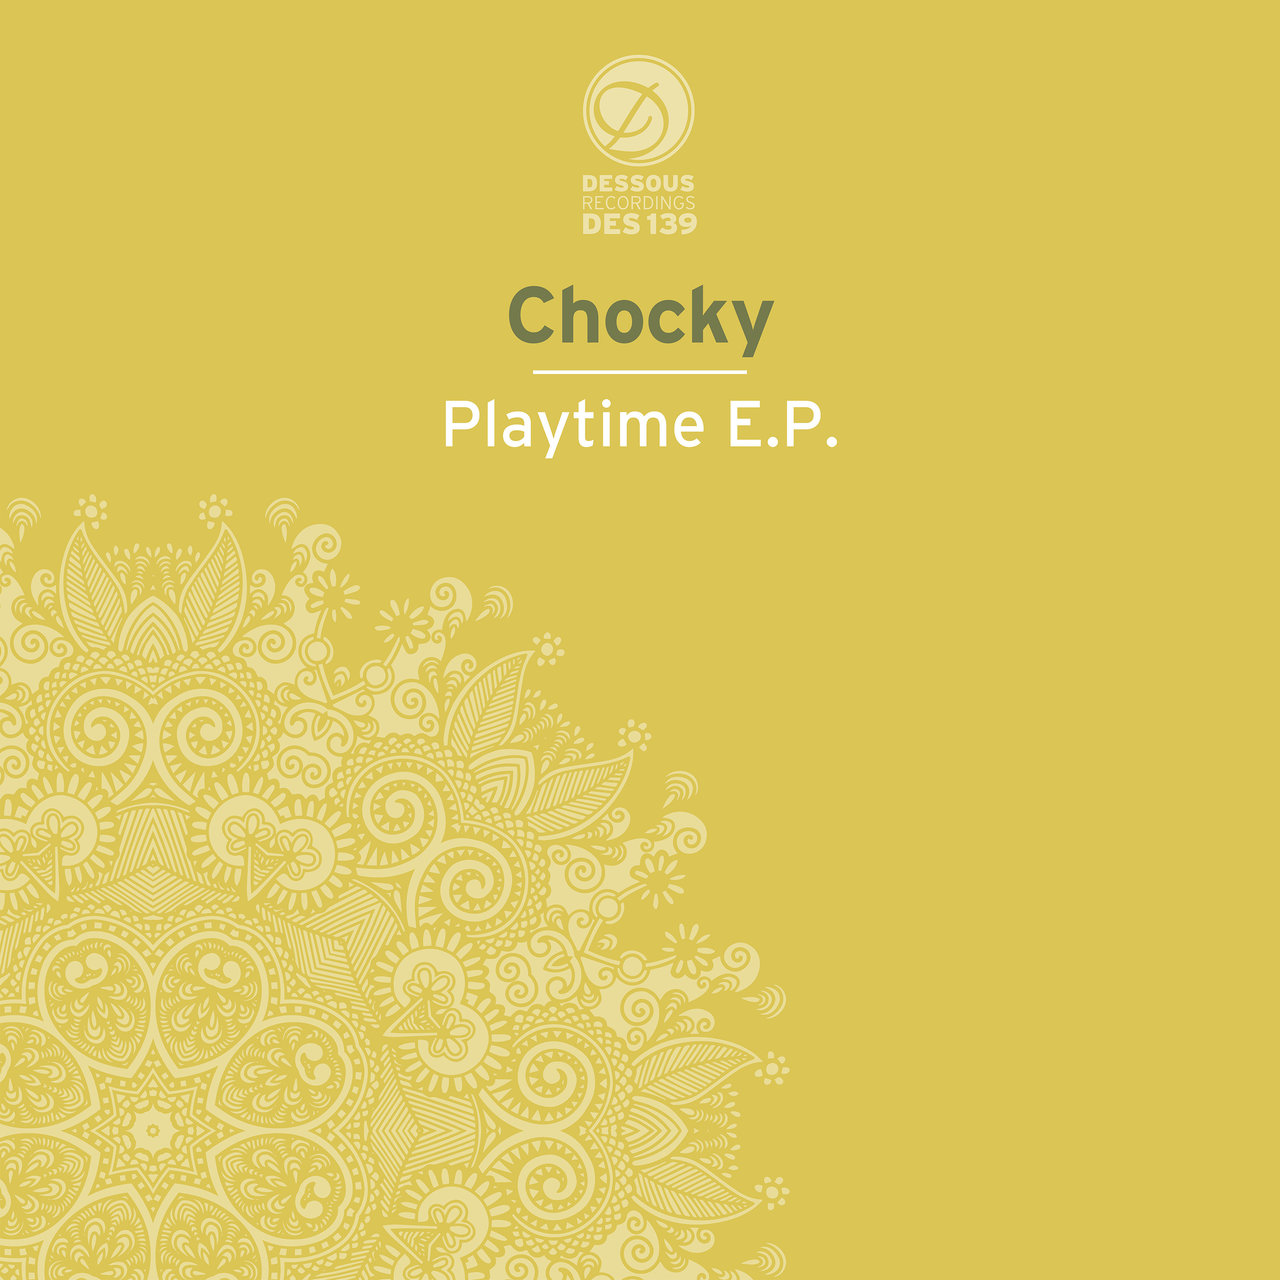 Chocky - Playtime EP / Dessous